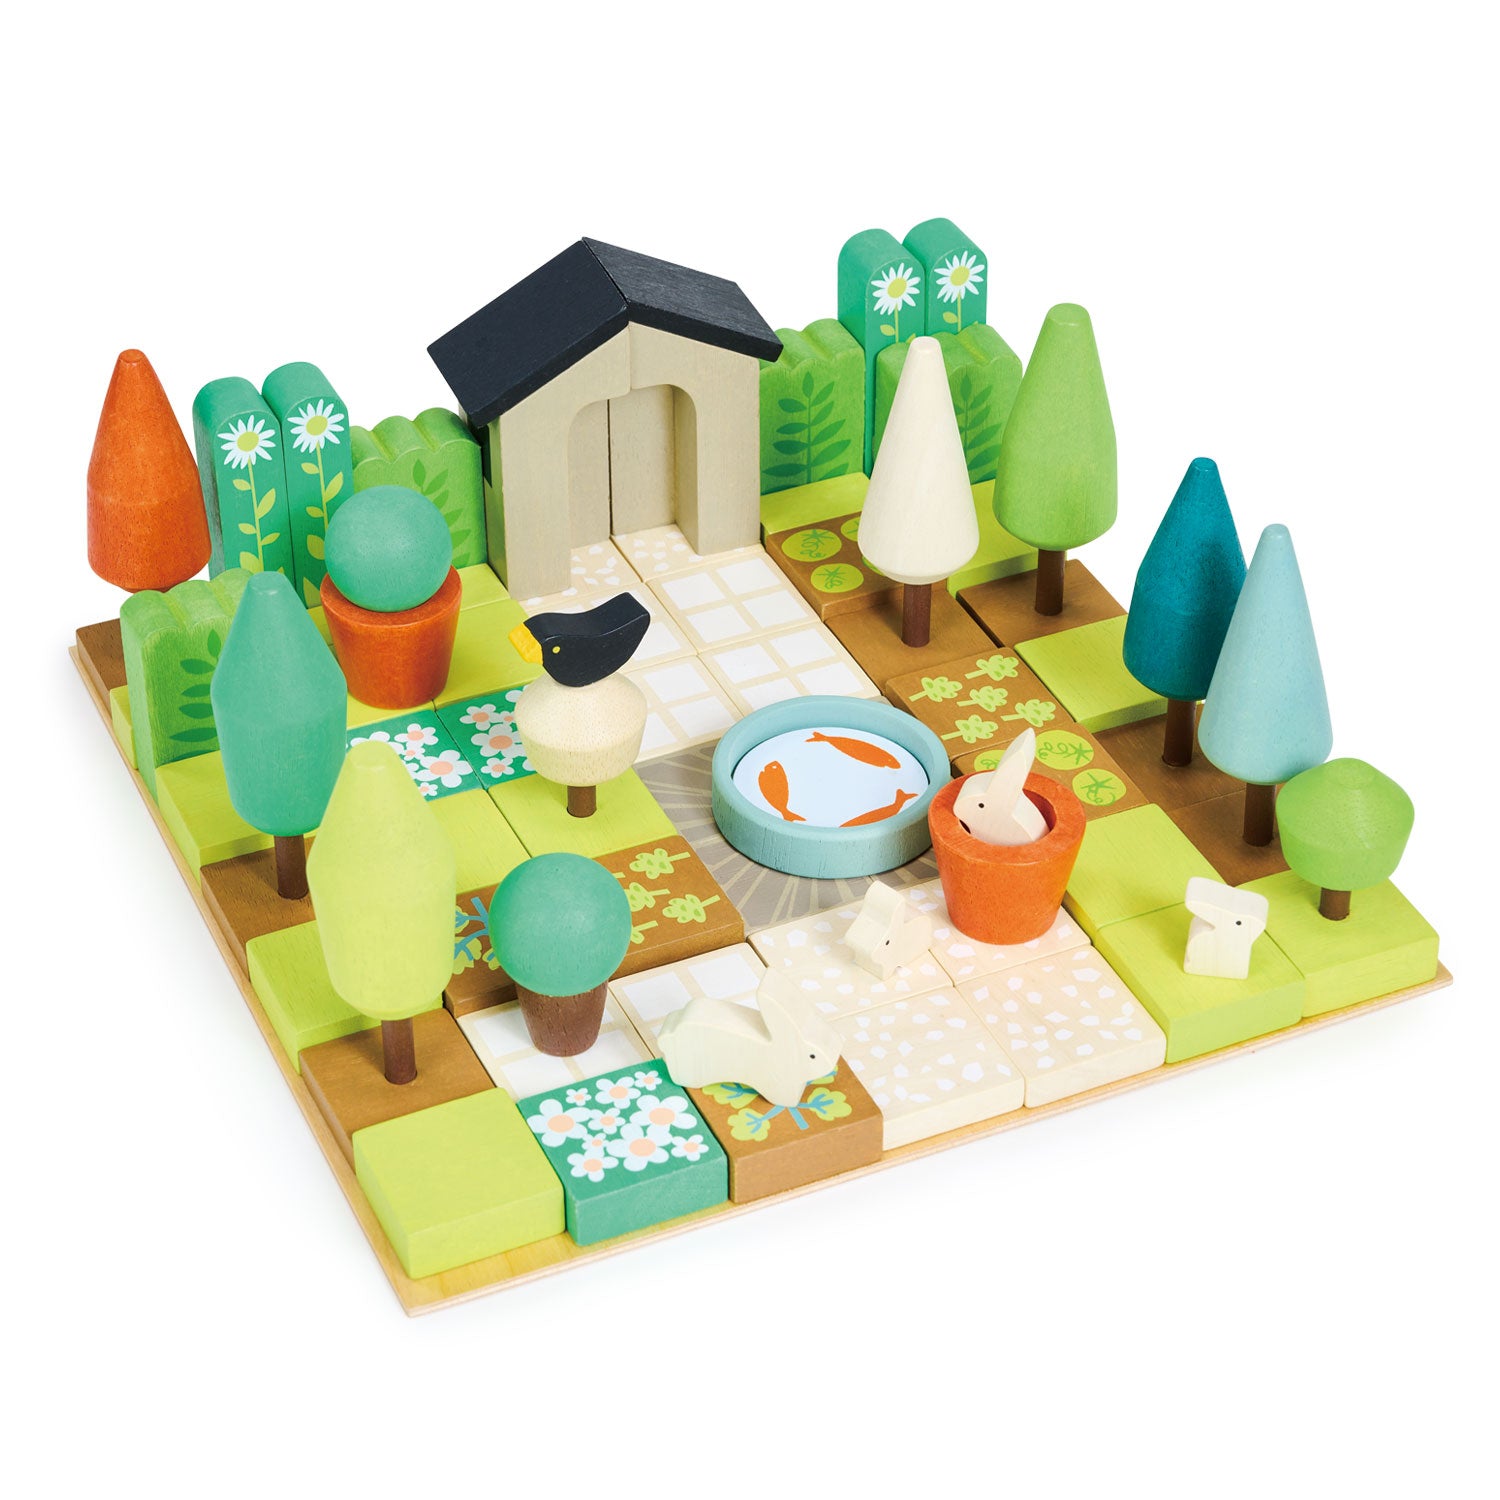 <p>Part of our open-ended play set range is this fabulous garden design game, which has 67 solid wood pieces that can all be arranged in an infinite number of garden designs. Set includes 7 trees, 2 bushes, 2 terracotta flower pots with removable bushes, 3 flower beds, 6 vegetable patch tiles, 4 sunflowers, 14 grass tiles, 6 patio and 6 path tiles, 4 paving slabs, 4 rabbits, a two-part shed, 4 hedge slabs and a pond. All contained in a beautiful plywood box with a sliding lid.</p>
<p>Age range: 3 years +  </p>
<p>Product size: 11.81 x 11.81 x 4.72”  </p>
<p>Weight: 4.66 Ibs</p>
